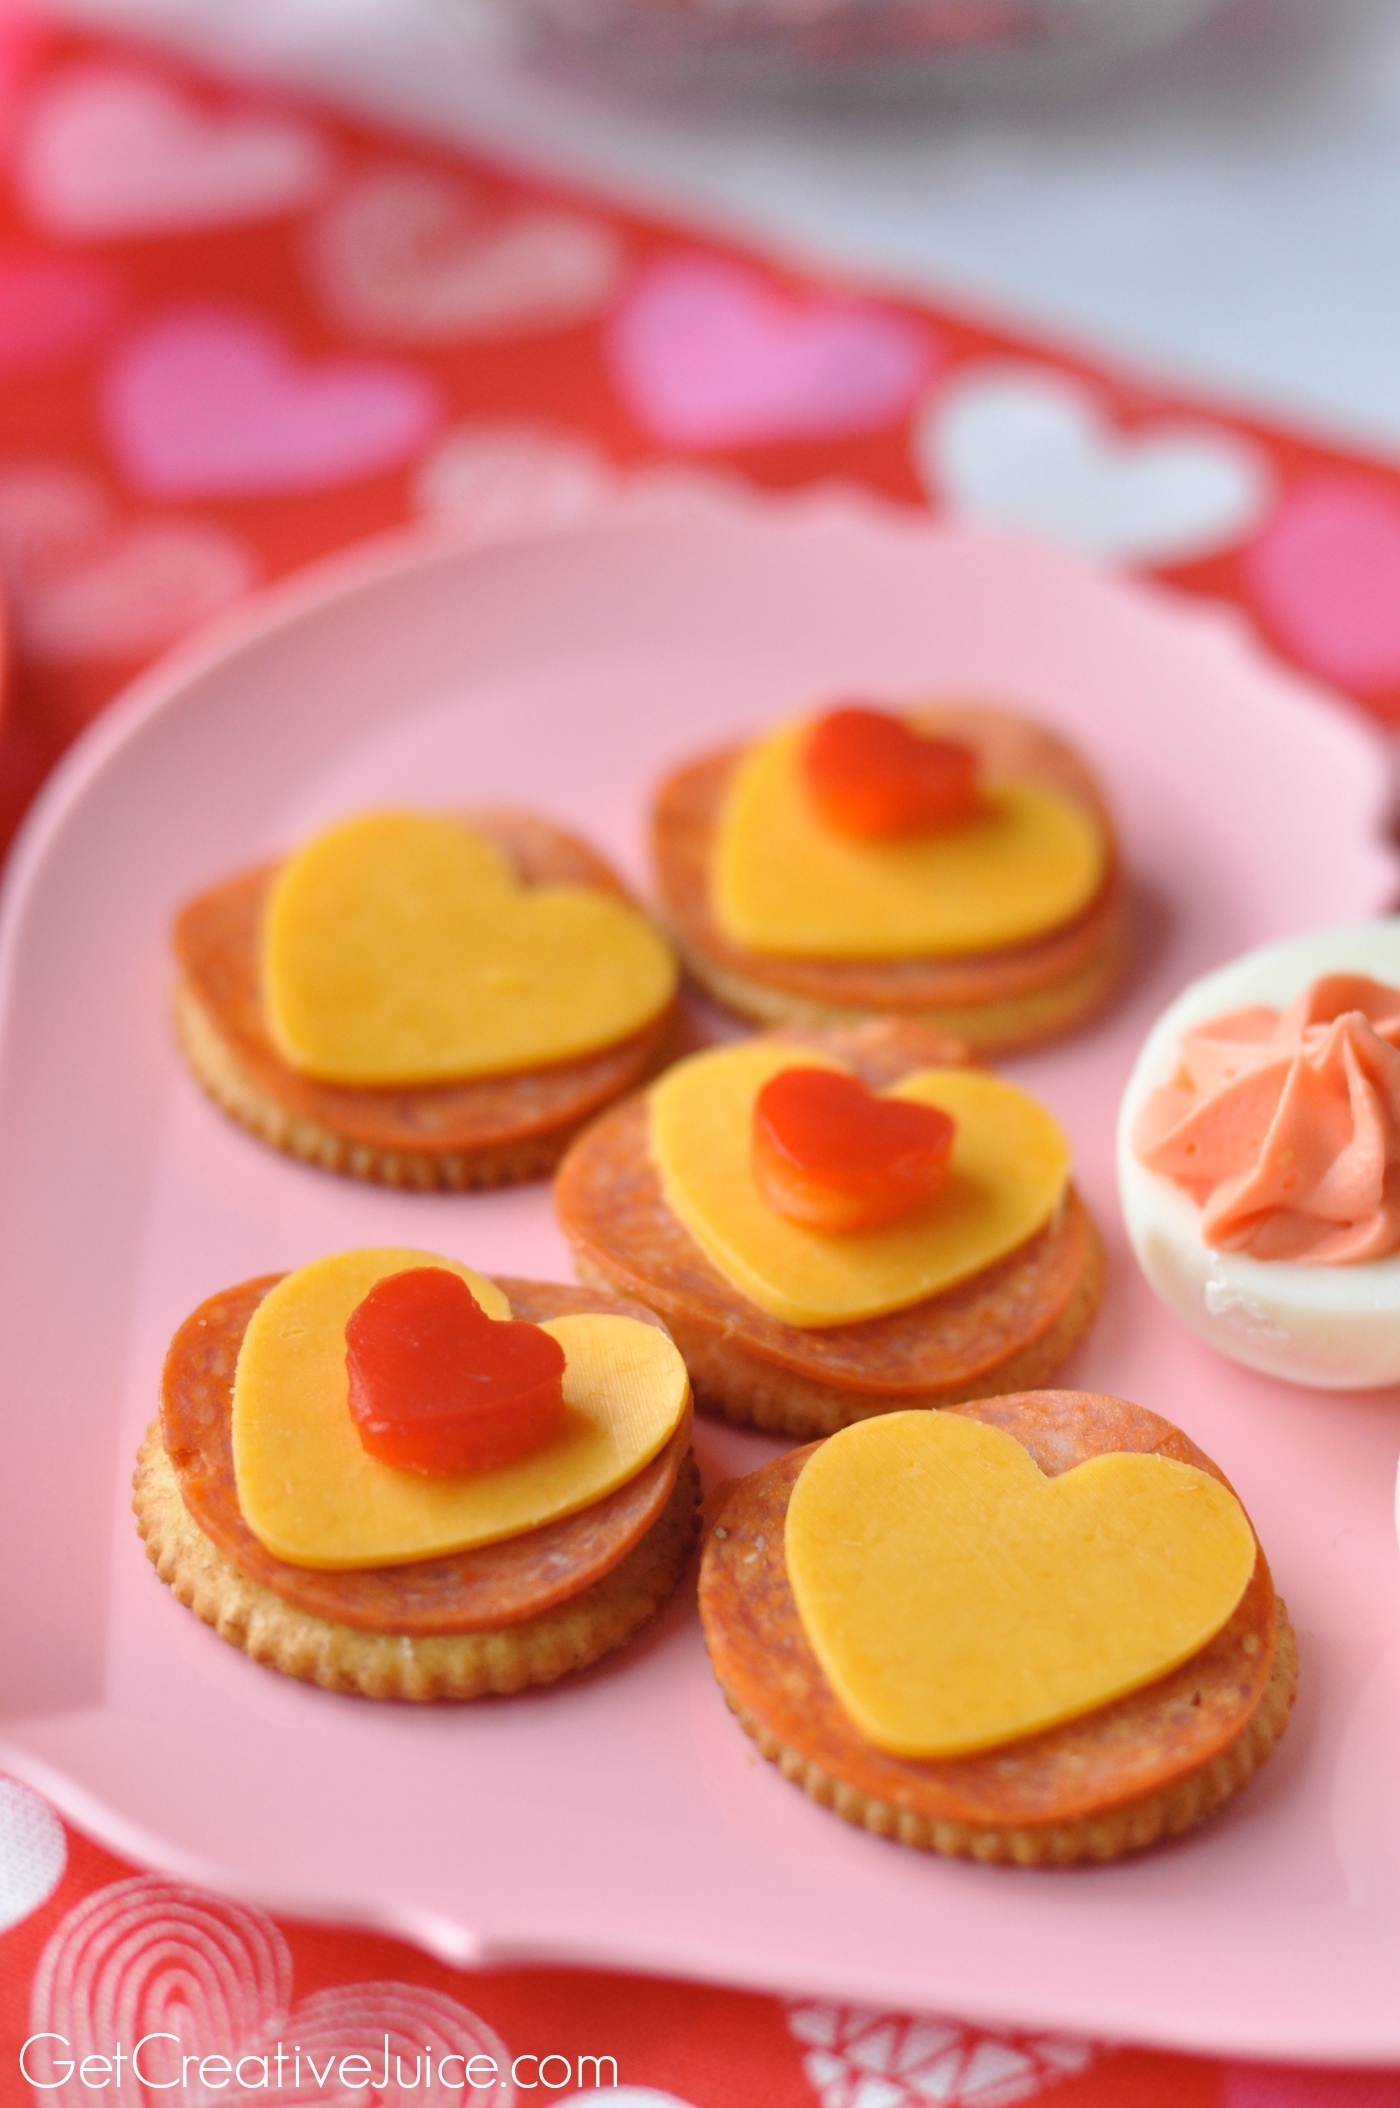 Valentine Lunch Ideas And Snack Ideas - Creative Juice throughout Fun Snack Ideas For Meetings